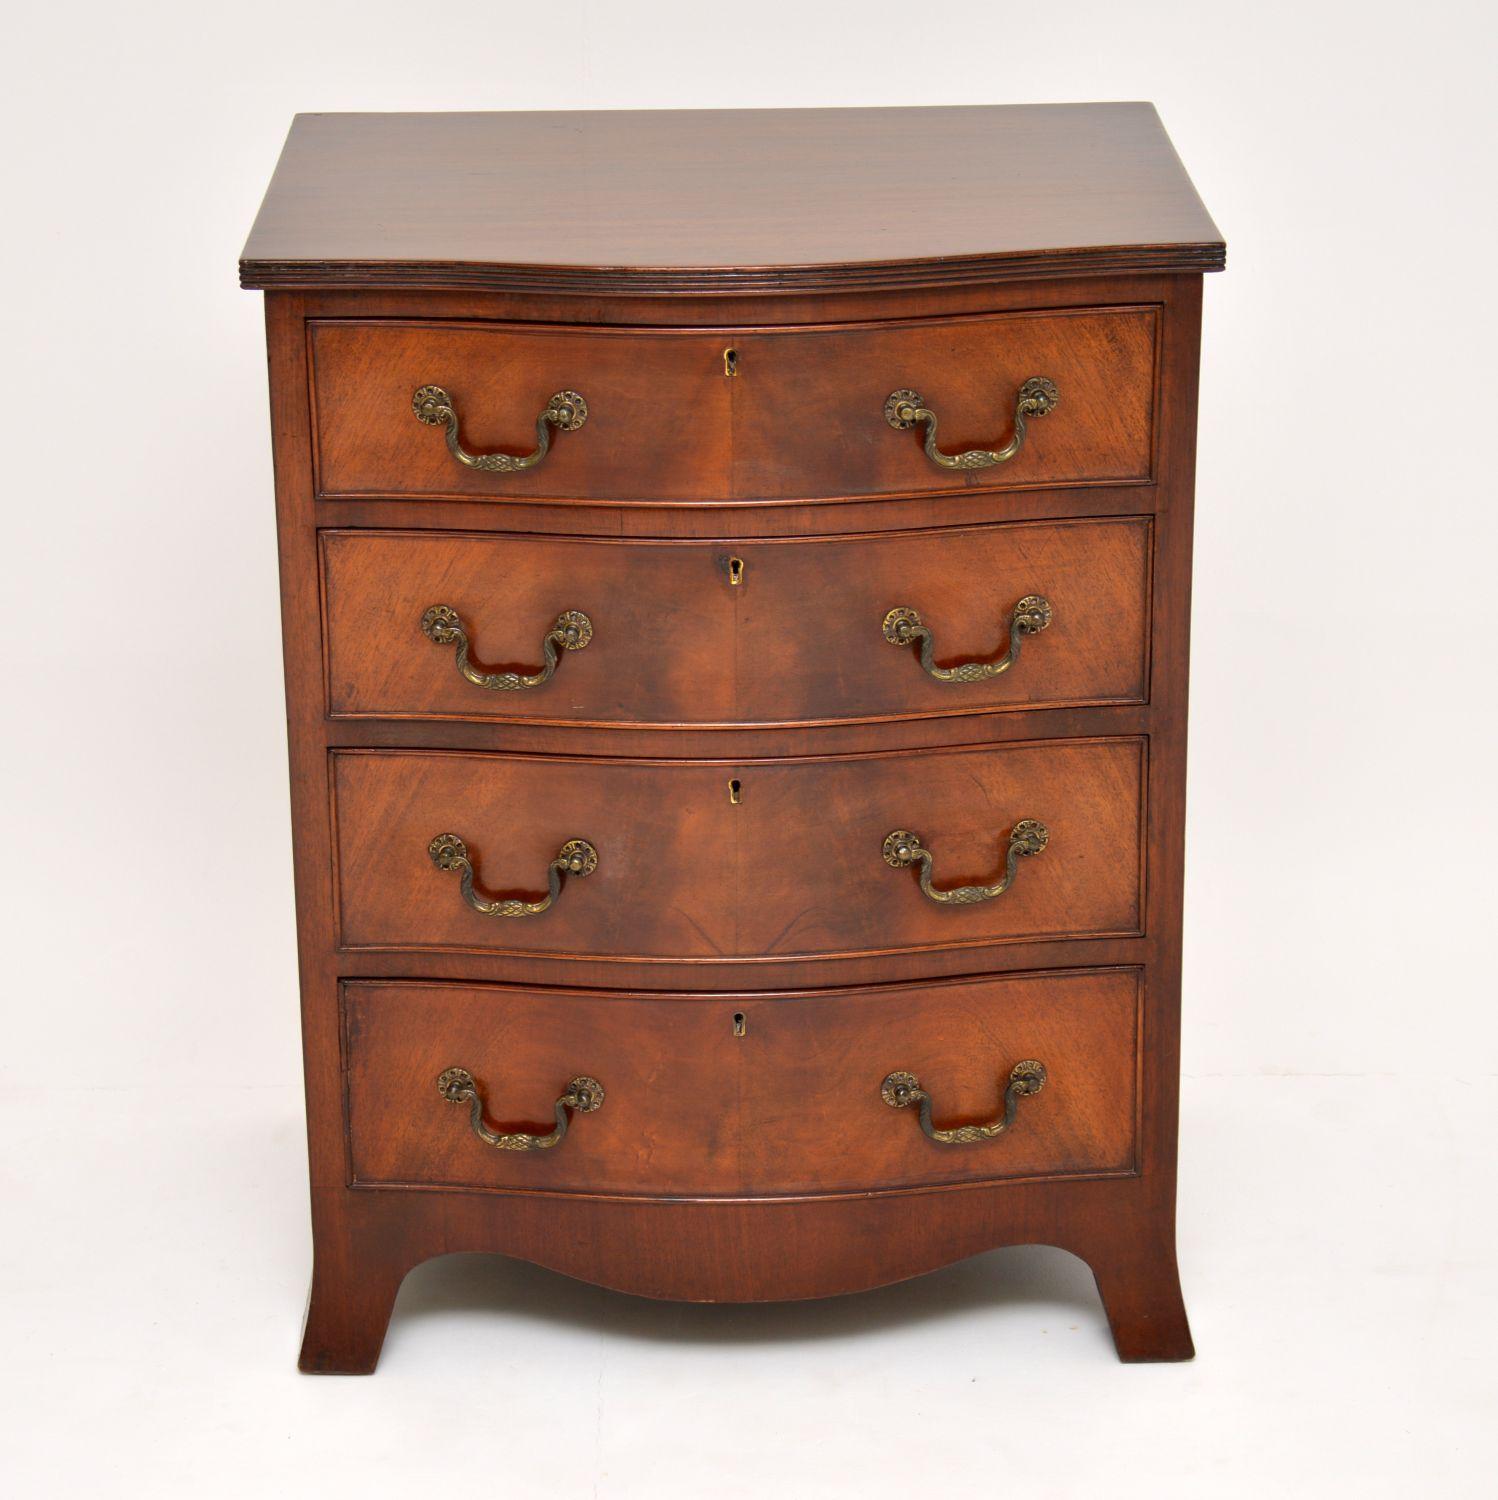 High quality antique mahogany chest of drawers of really nice small proportions. It’s in excellent original condition & dates from around the 1900-1910 period. This chest has a serpentine shaped front, a reeded top edge and sits on splayed feet. The